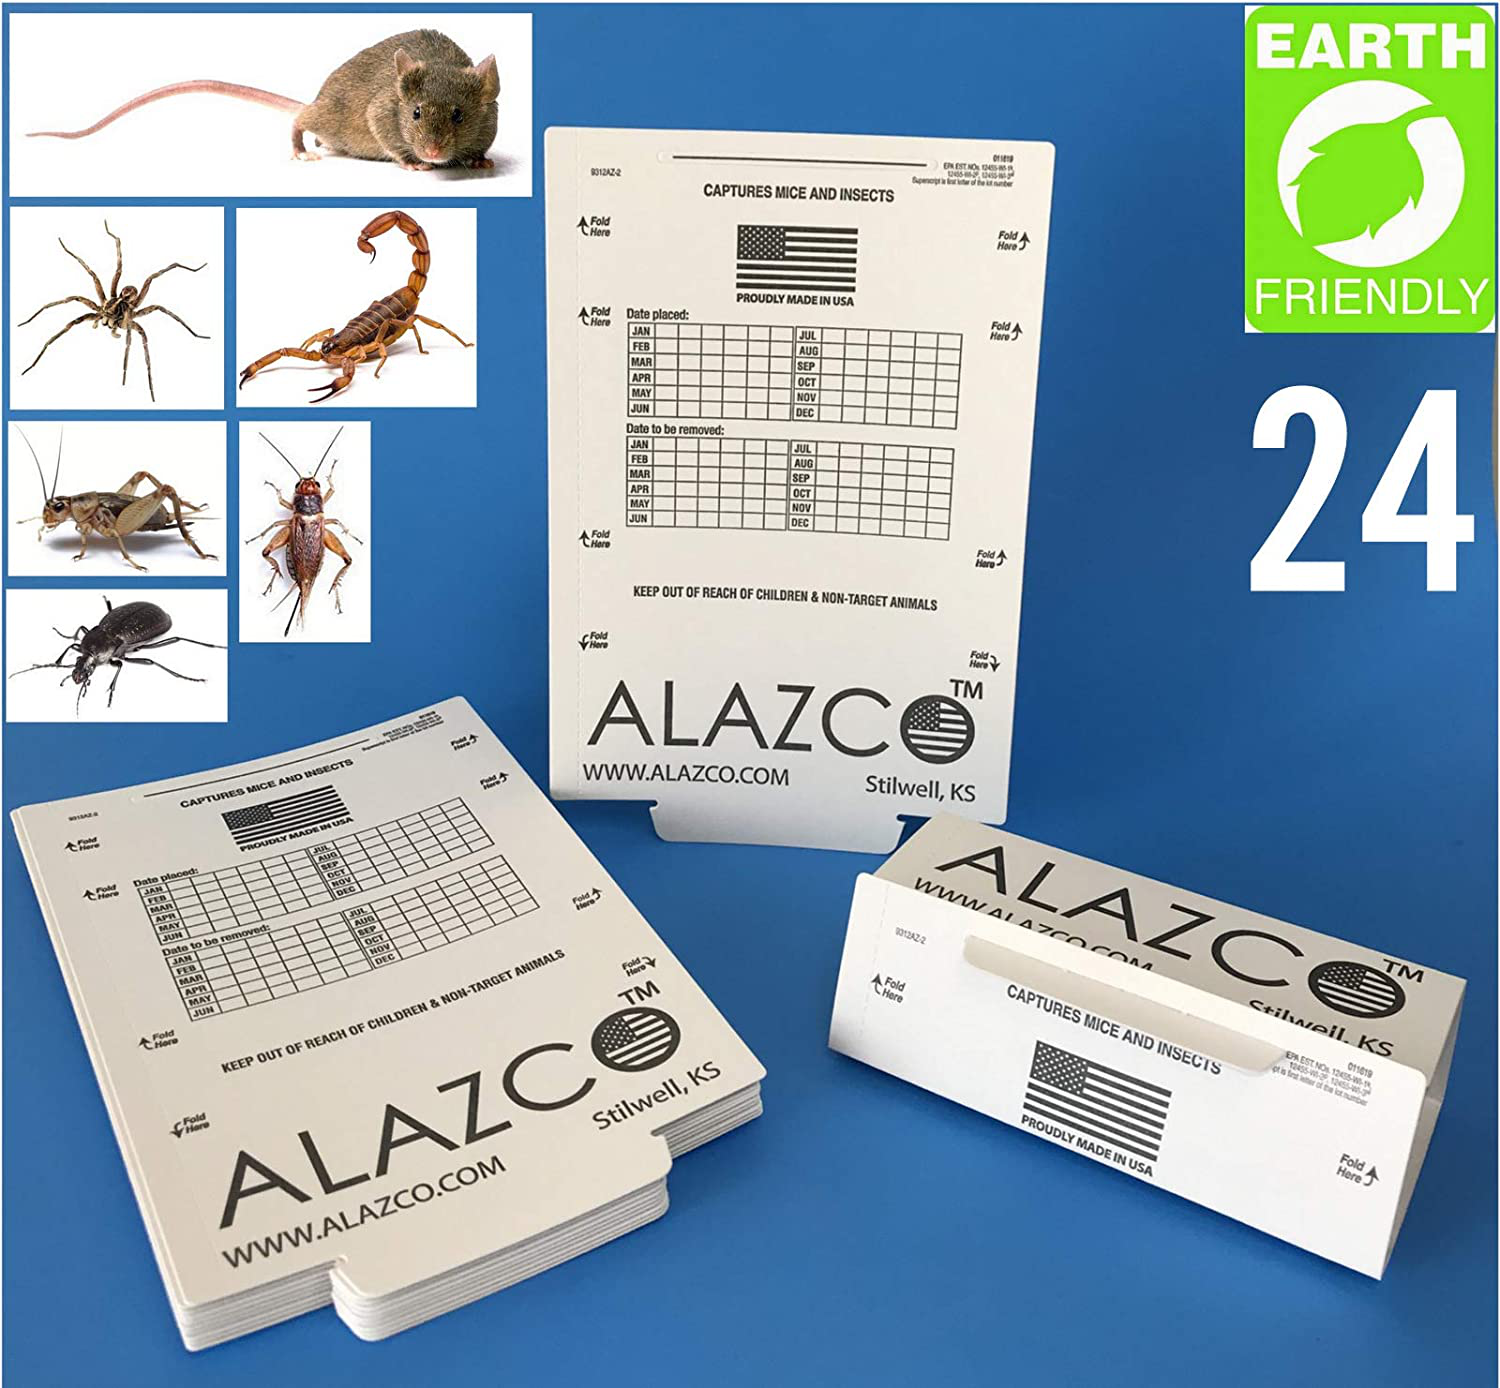 ALAZCO 6 Glue Traps - Excellent Quality Glue Boards Mouse Trap Bugs Insects Spiders, Brown Recluse, Crickets Cockroaches Lizard Scorpion Mice Trap & Monitor Non-Toxic Made in USA